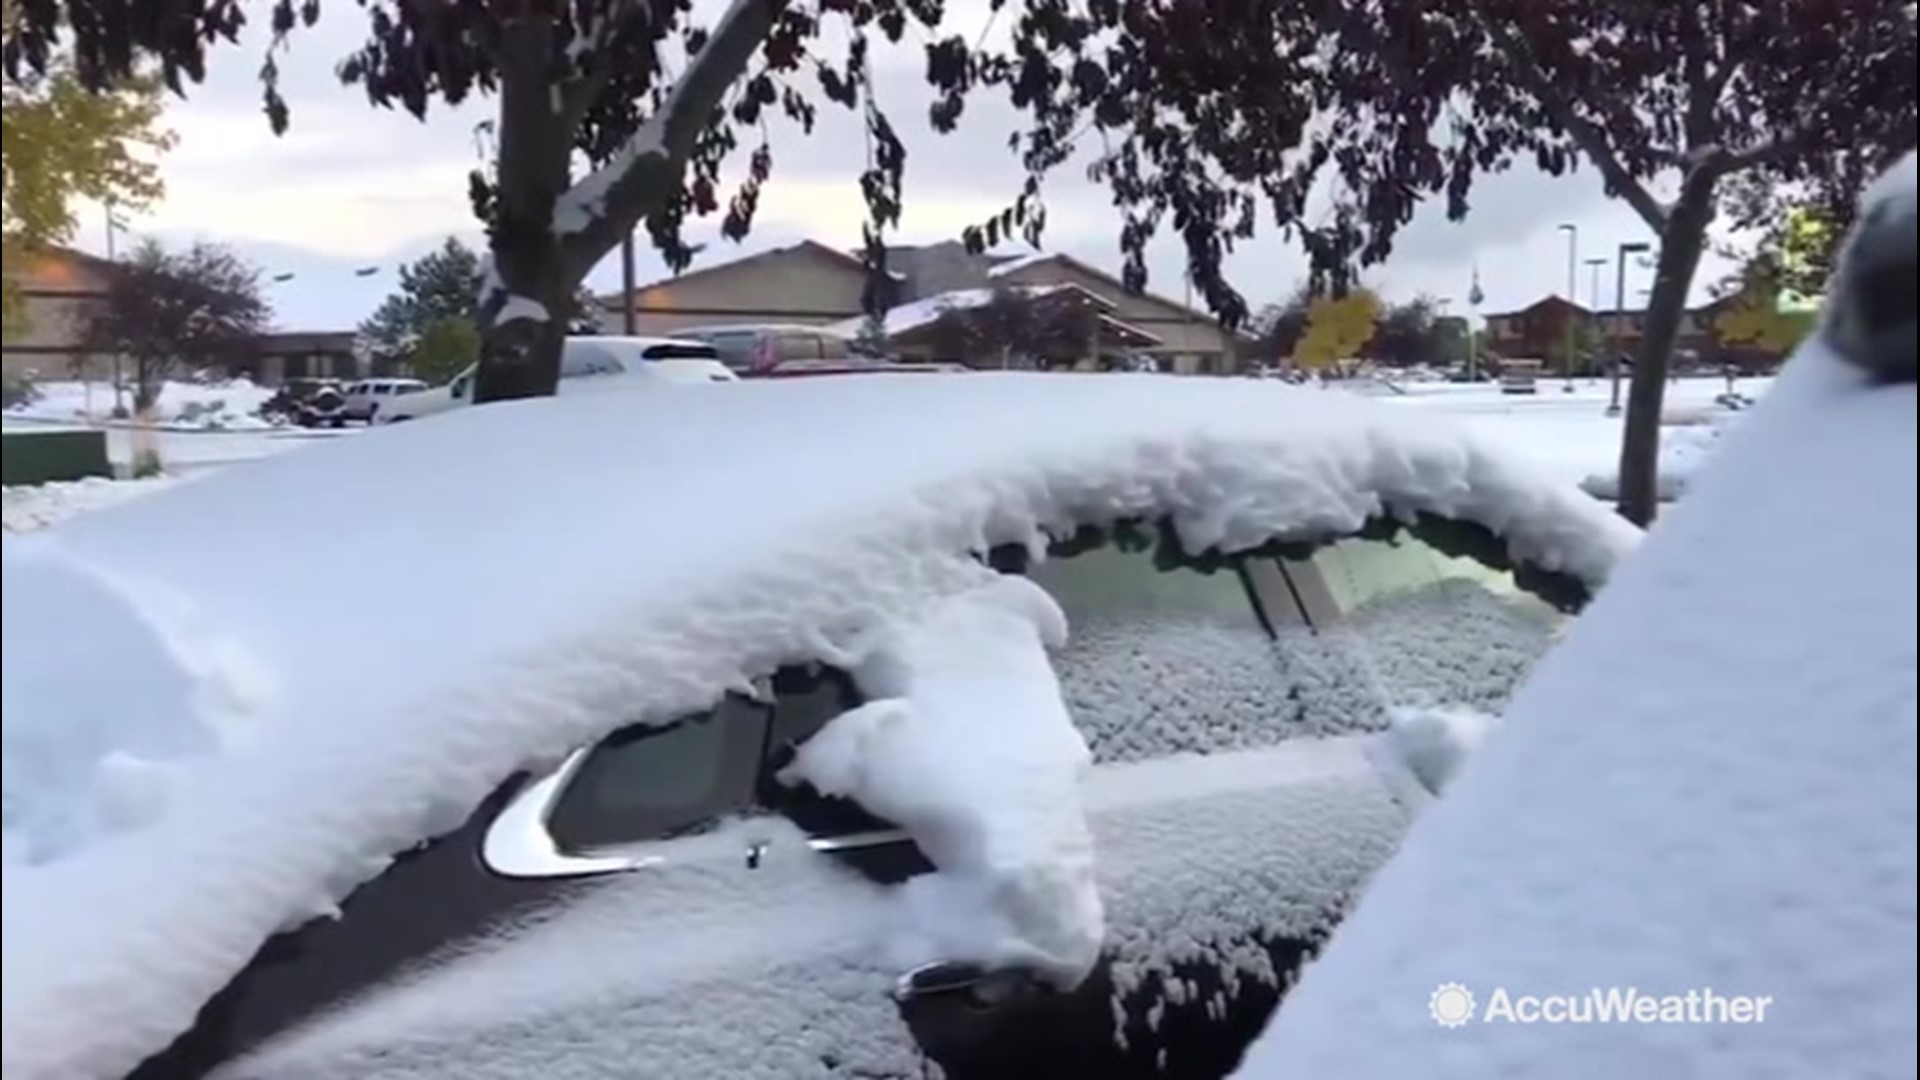 In the aftermath of a winterlike storm, many vehicles were seen buried in snow in Billings, Montana, on Oct. 10.